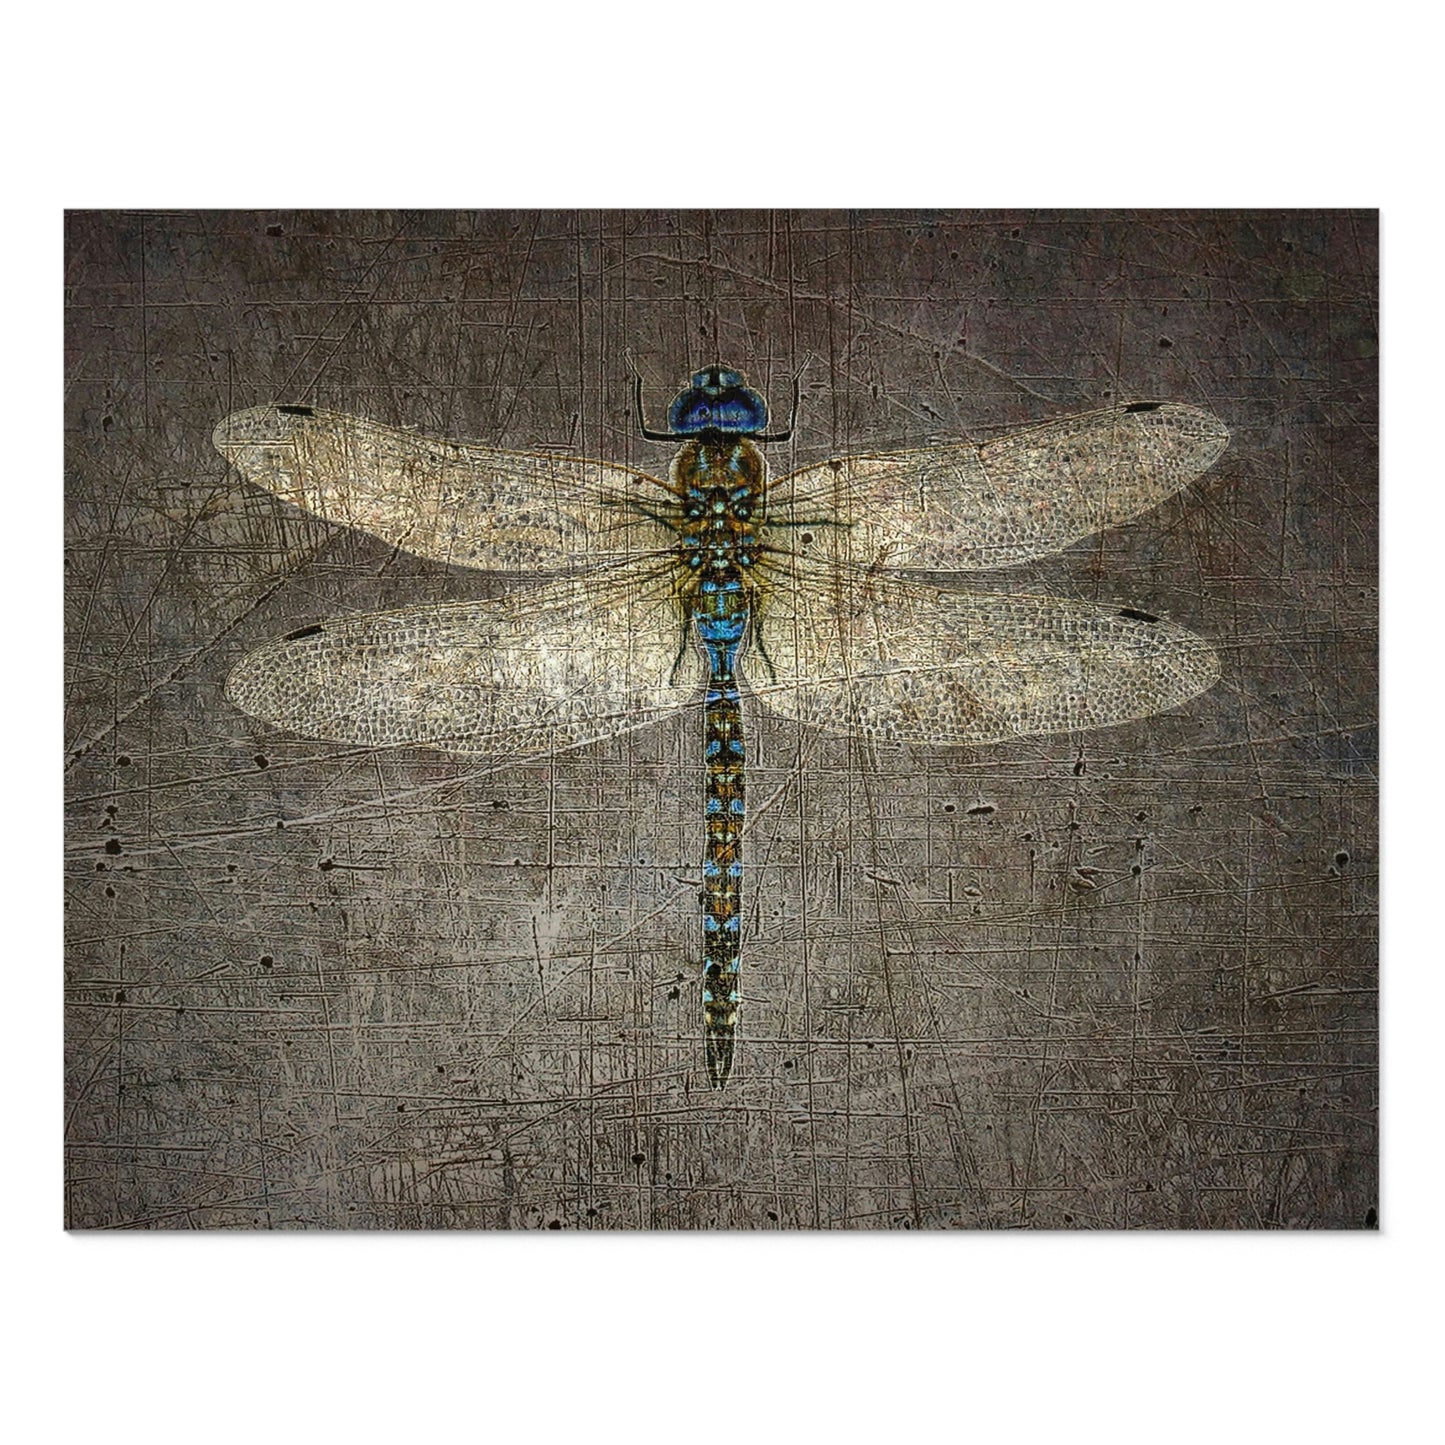 Dragonfly on Distressed Granite Background Puzzle 250 pieces